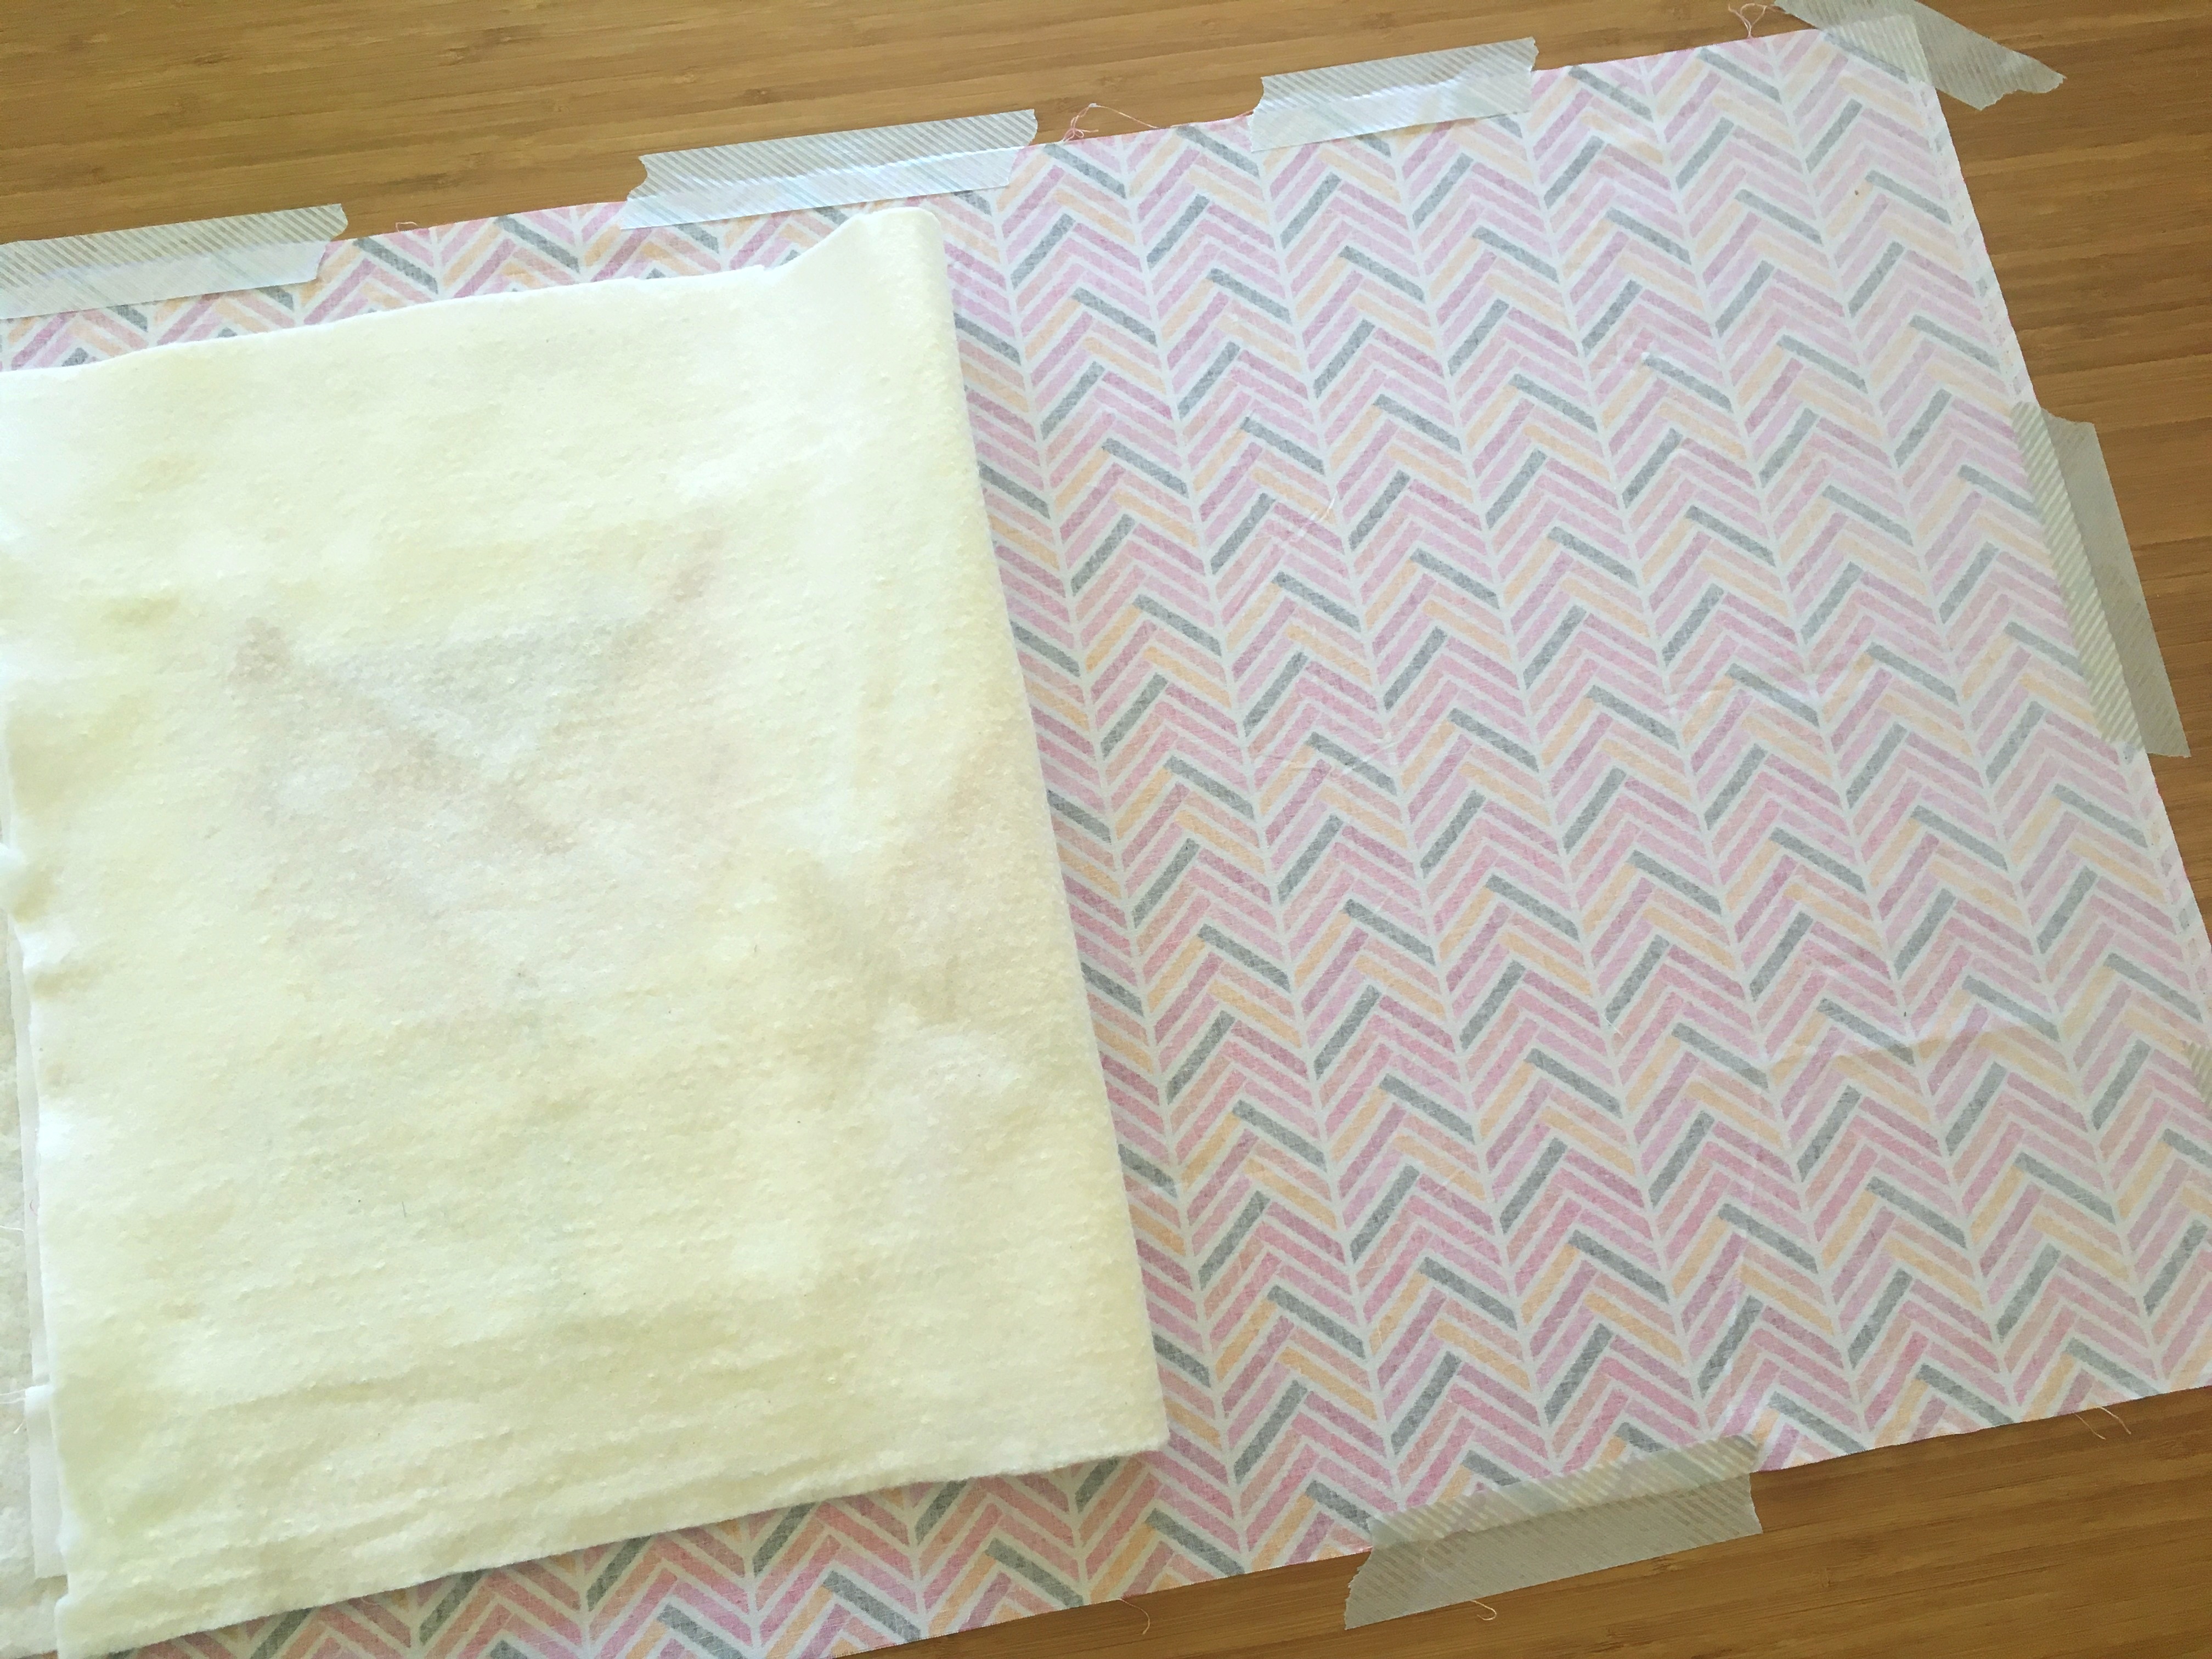 Quilt Basting Spray: Take the Pain Out of Layering and Basting a Quilt